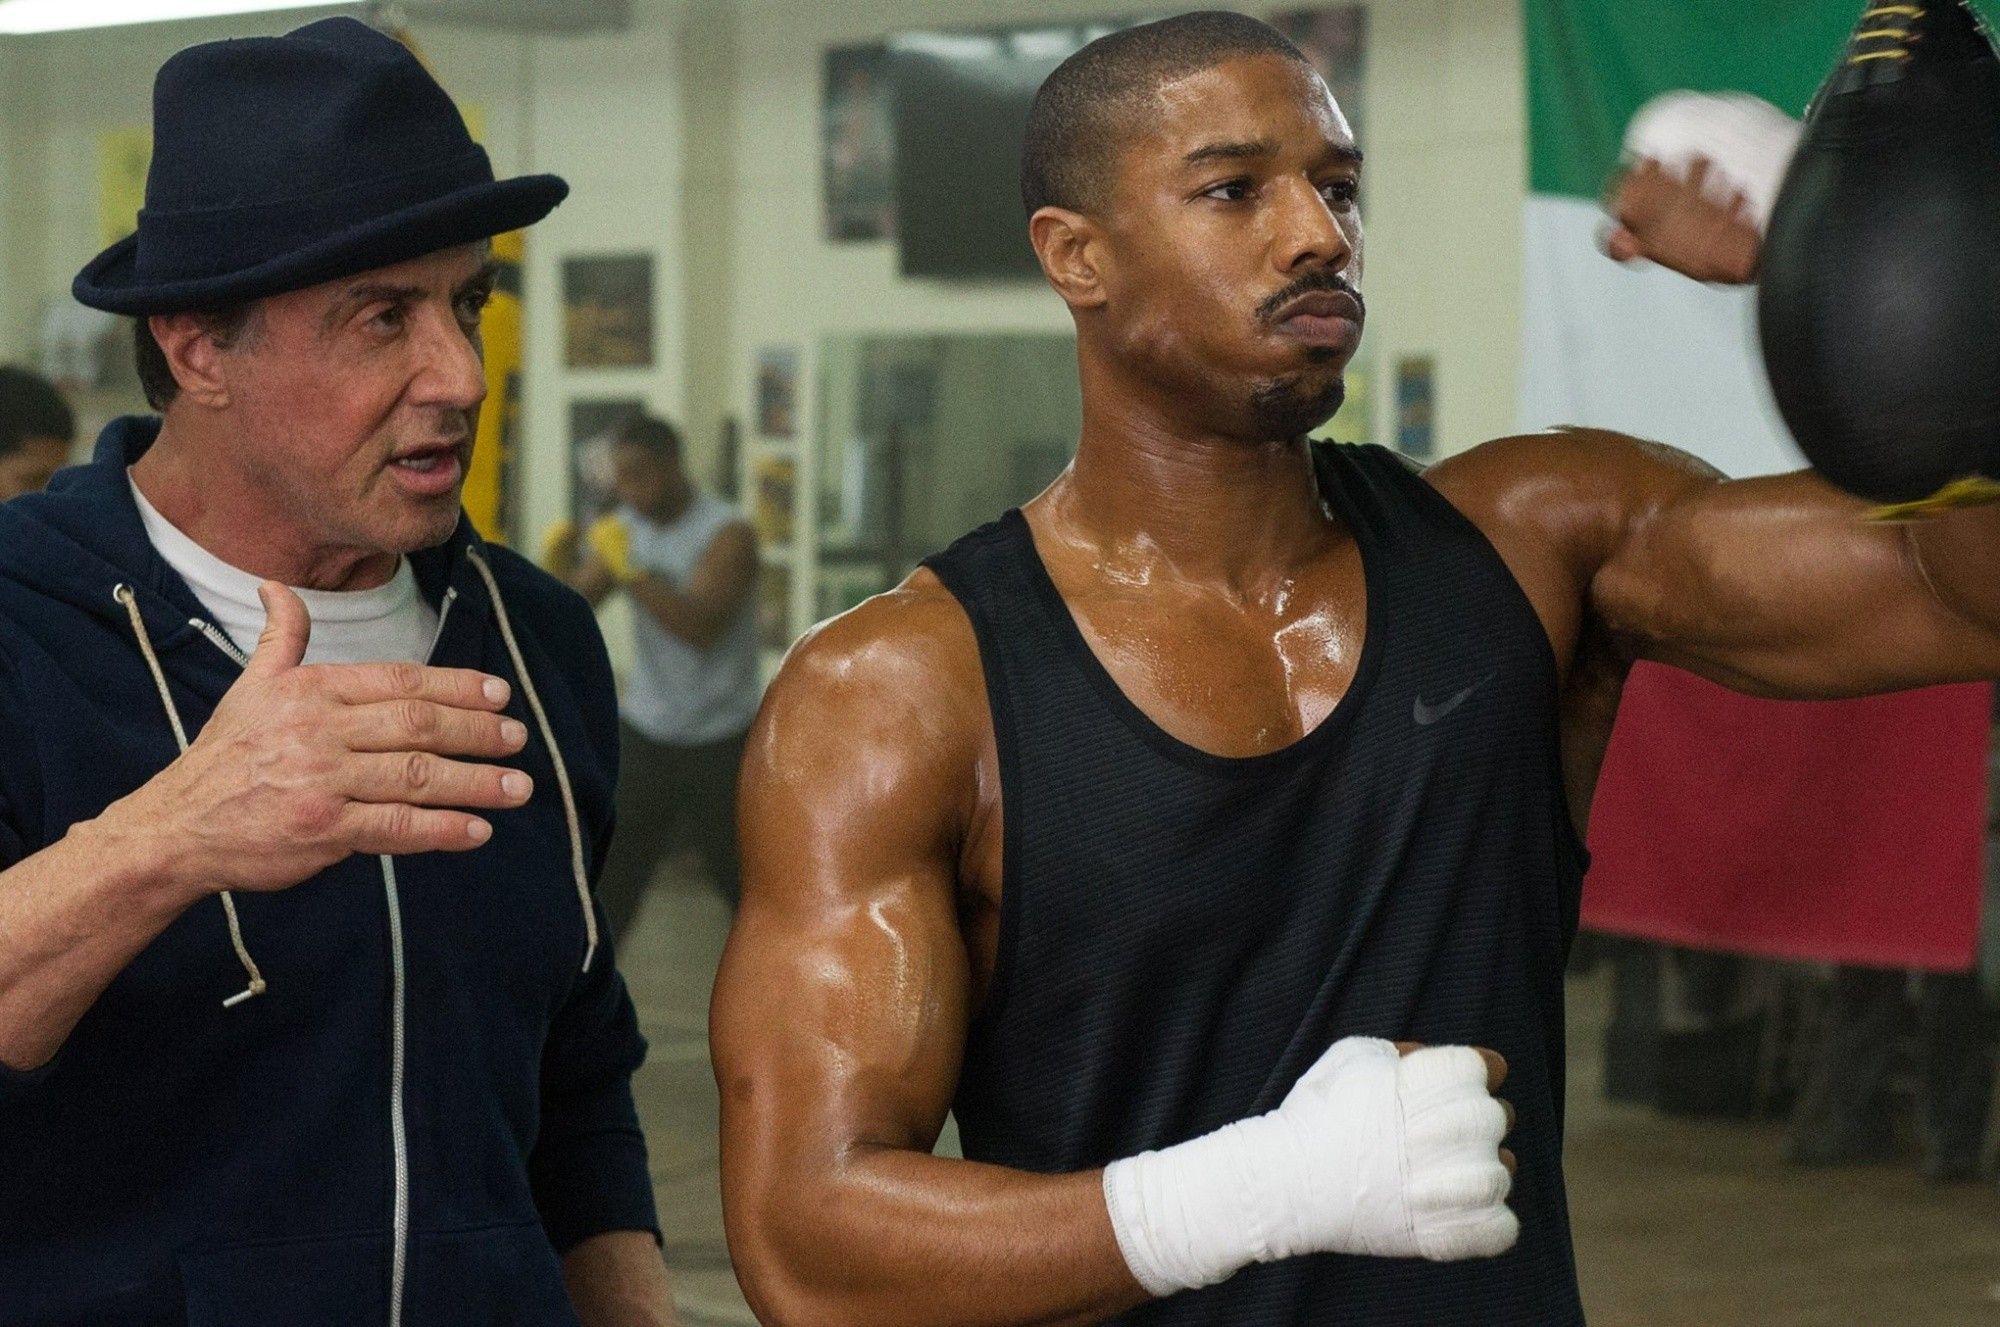 Sylvester Stallone stars as Rocky Balboa and Michael B. Jordan stars as Adonis Creed in Warner Bros. Pictures' Creed (2015)